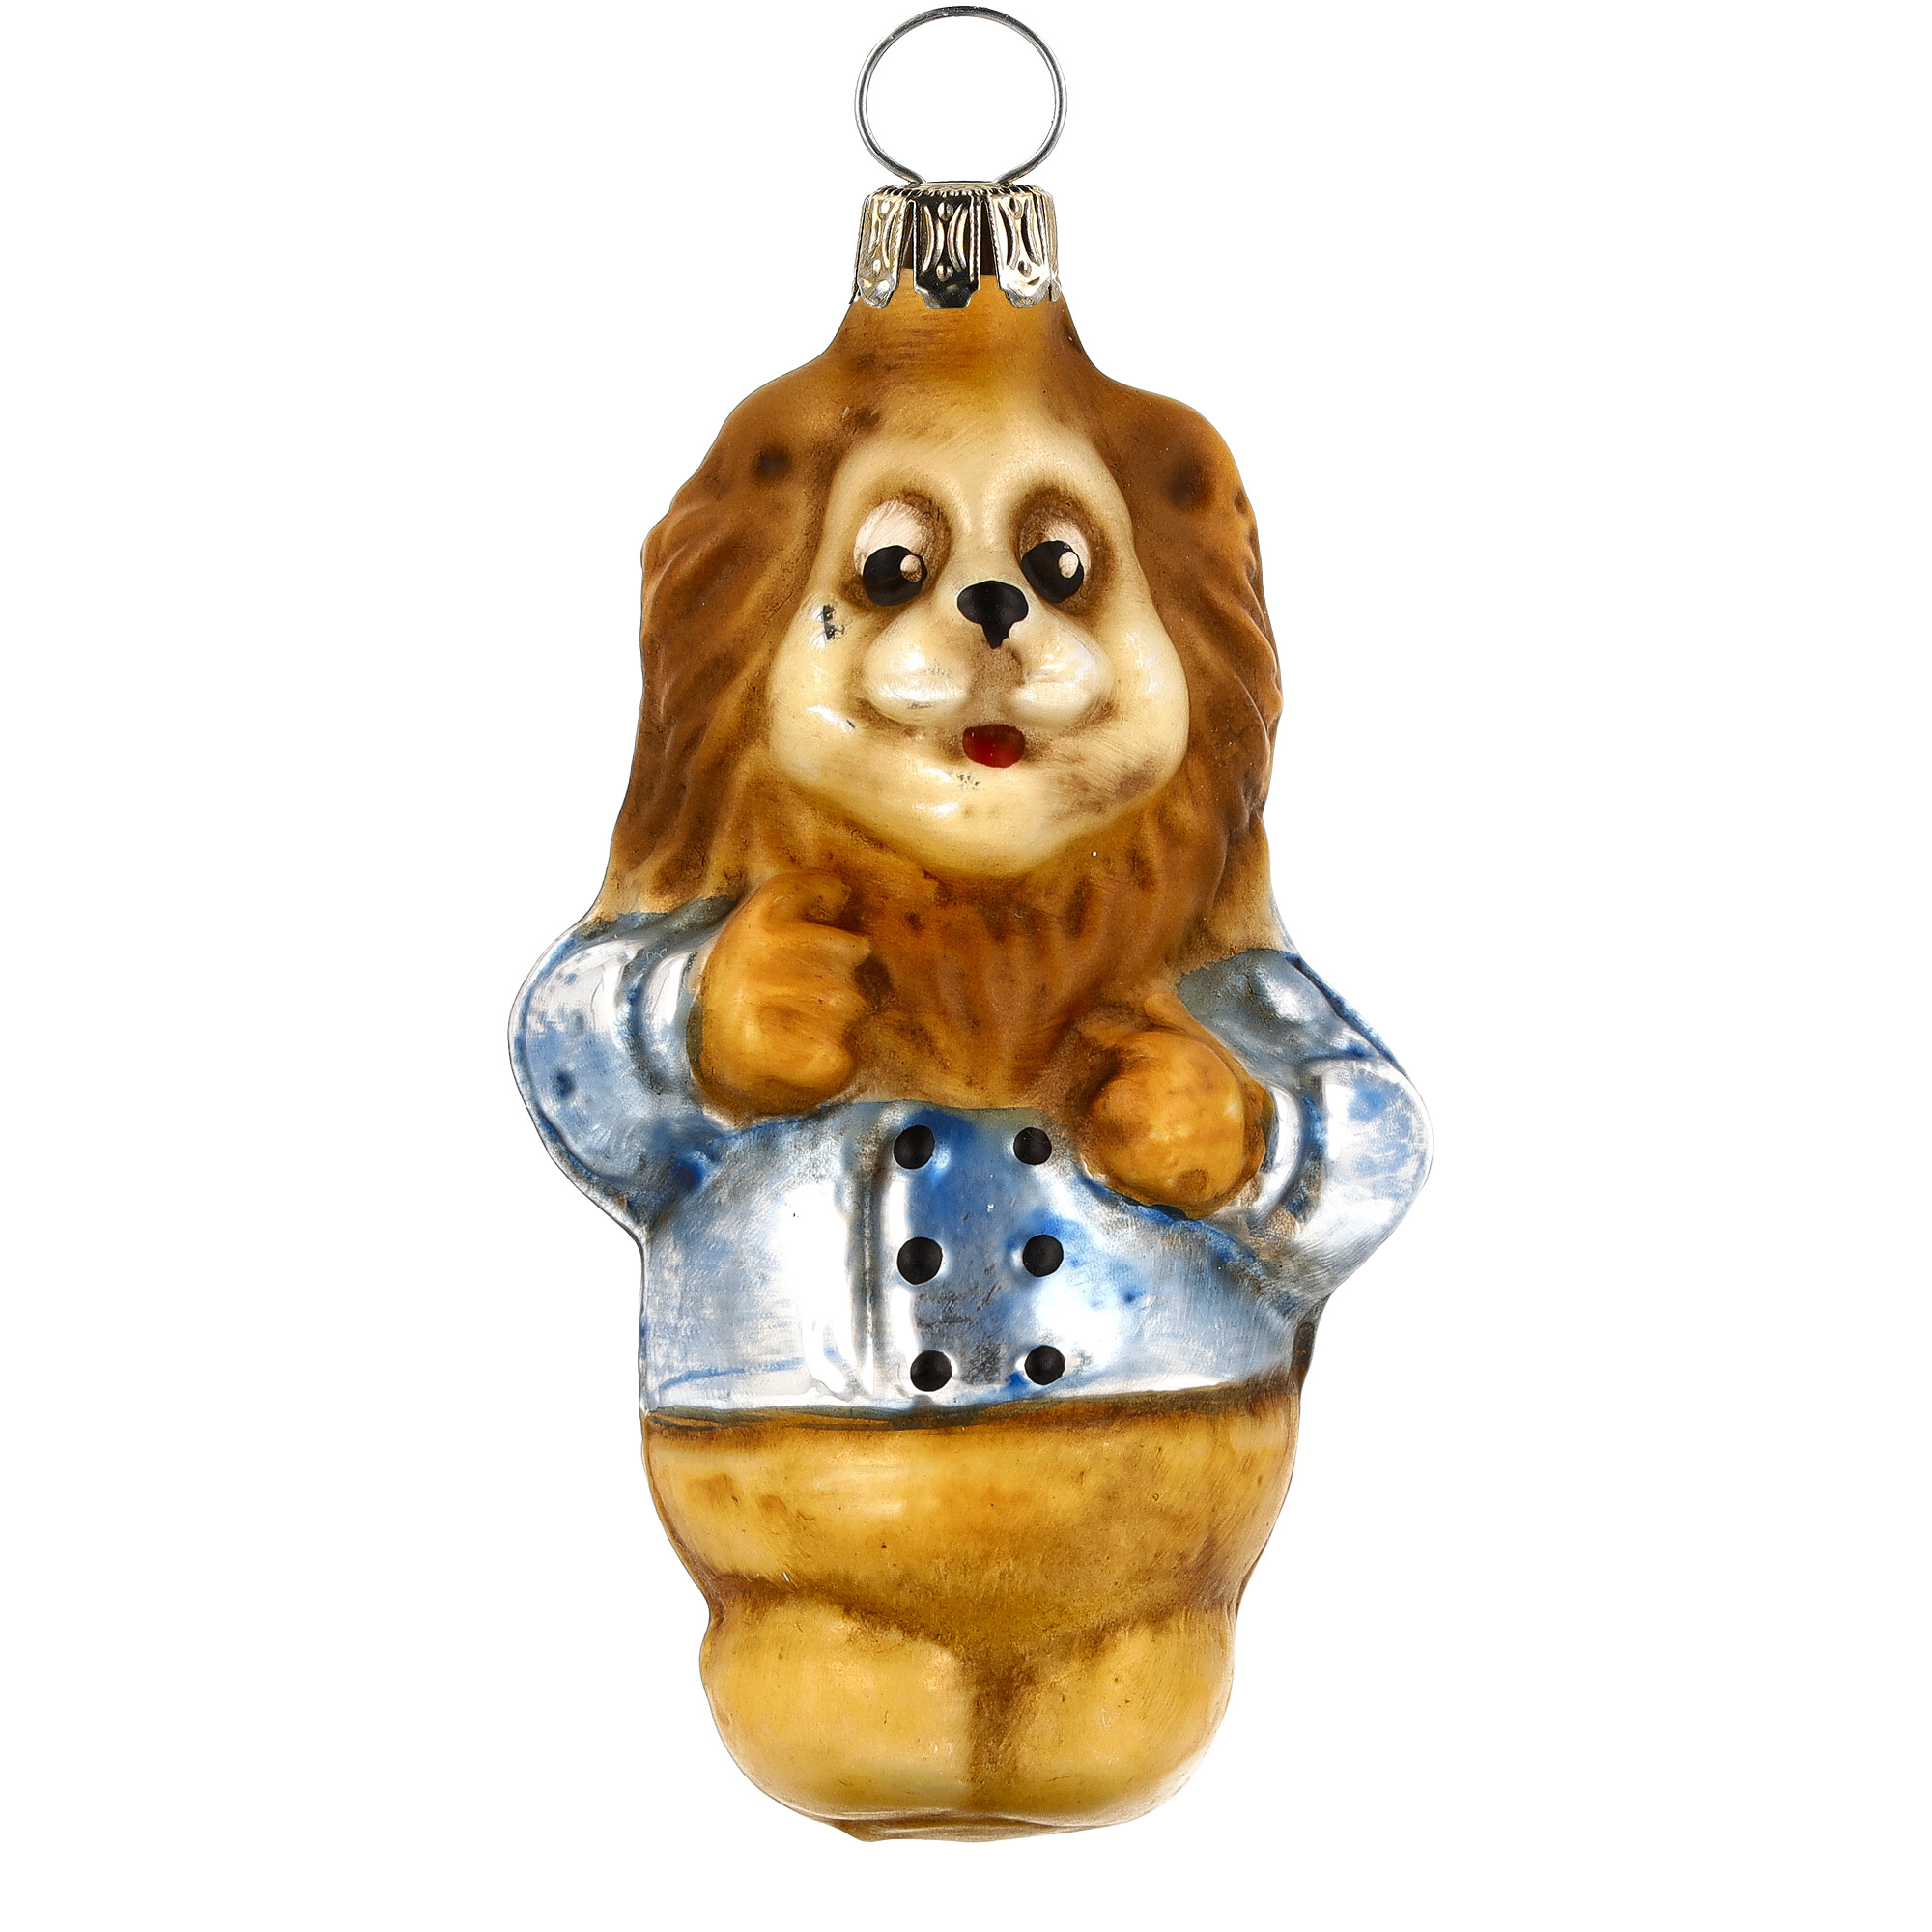 Retro Vintage style Christmas Glass Ornament - Lion with jacket